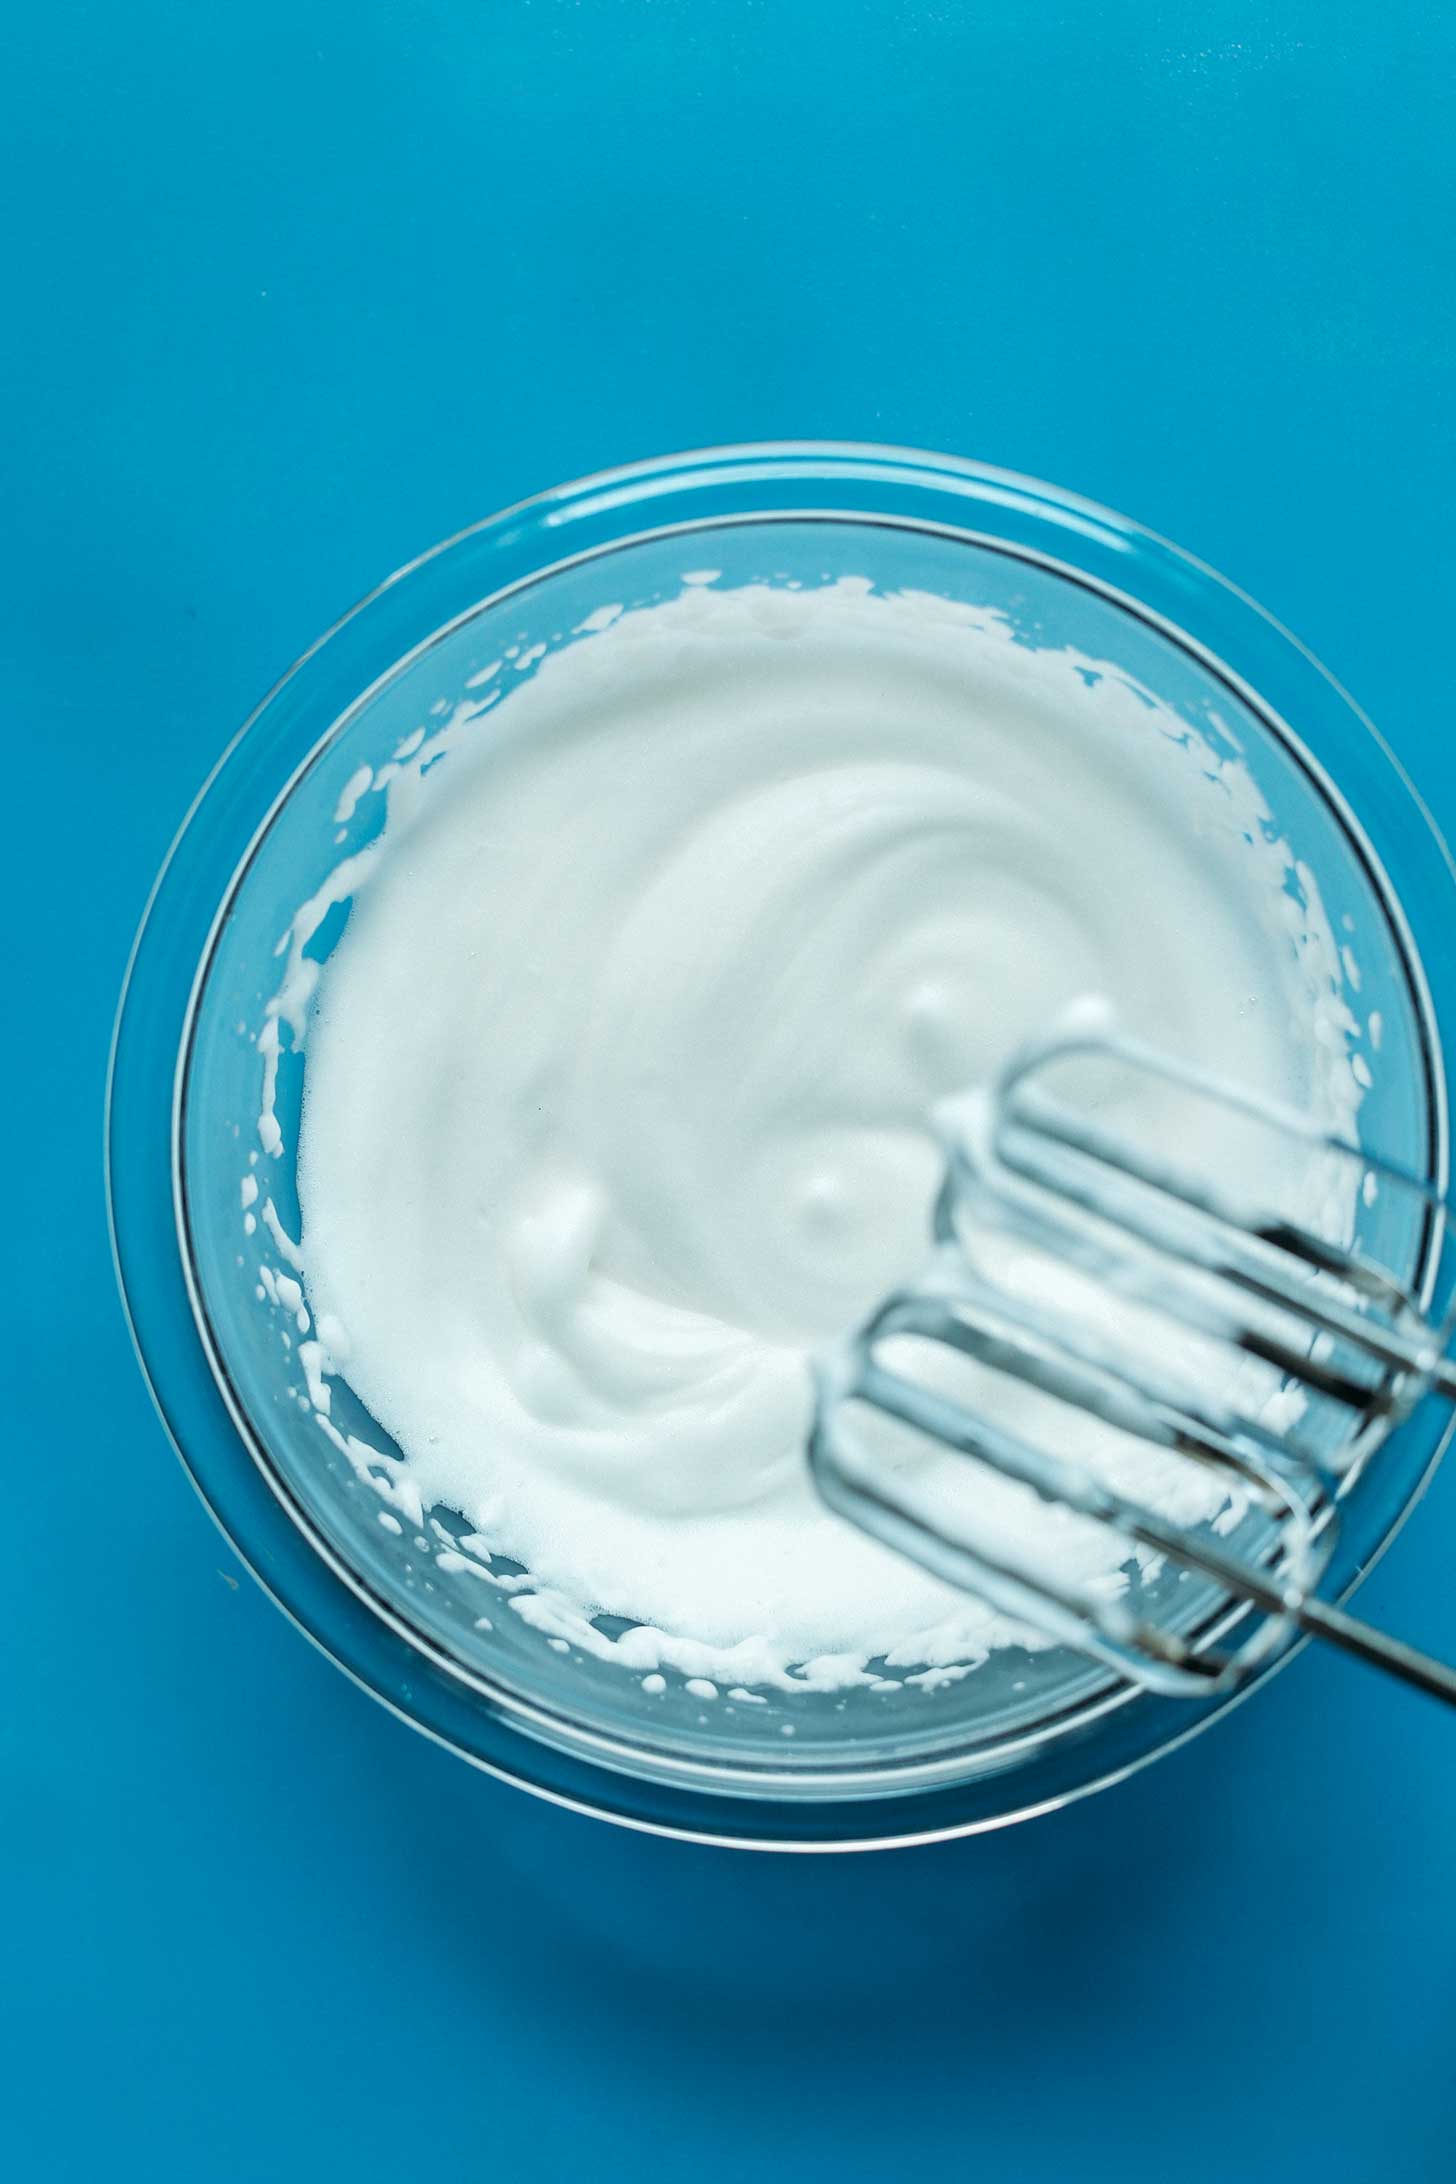 Electric mixer blades over a bowl of freshly whipped aquafaba